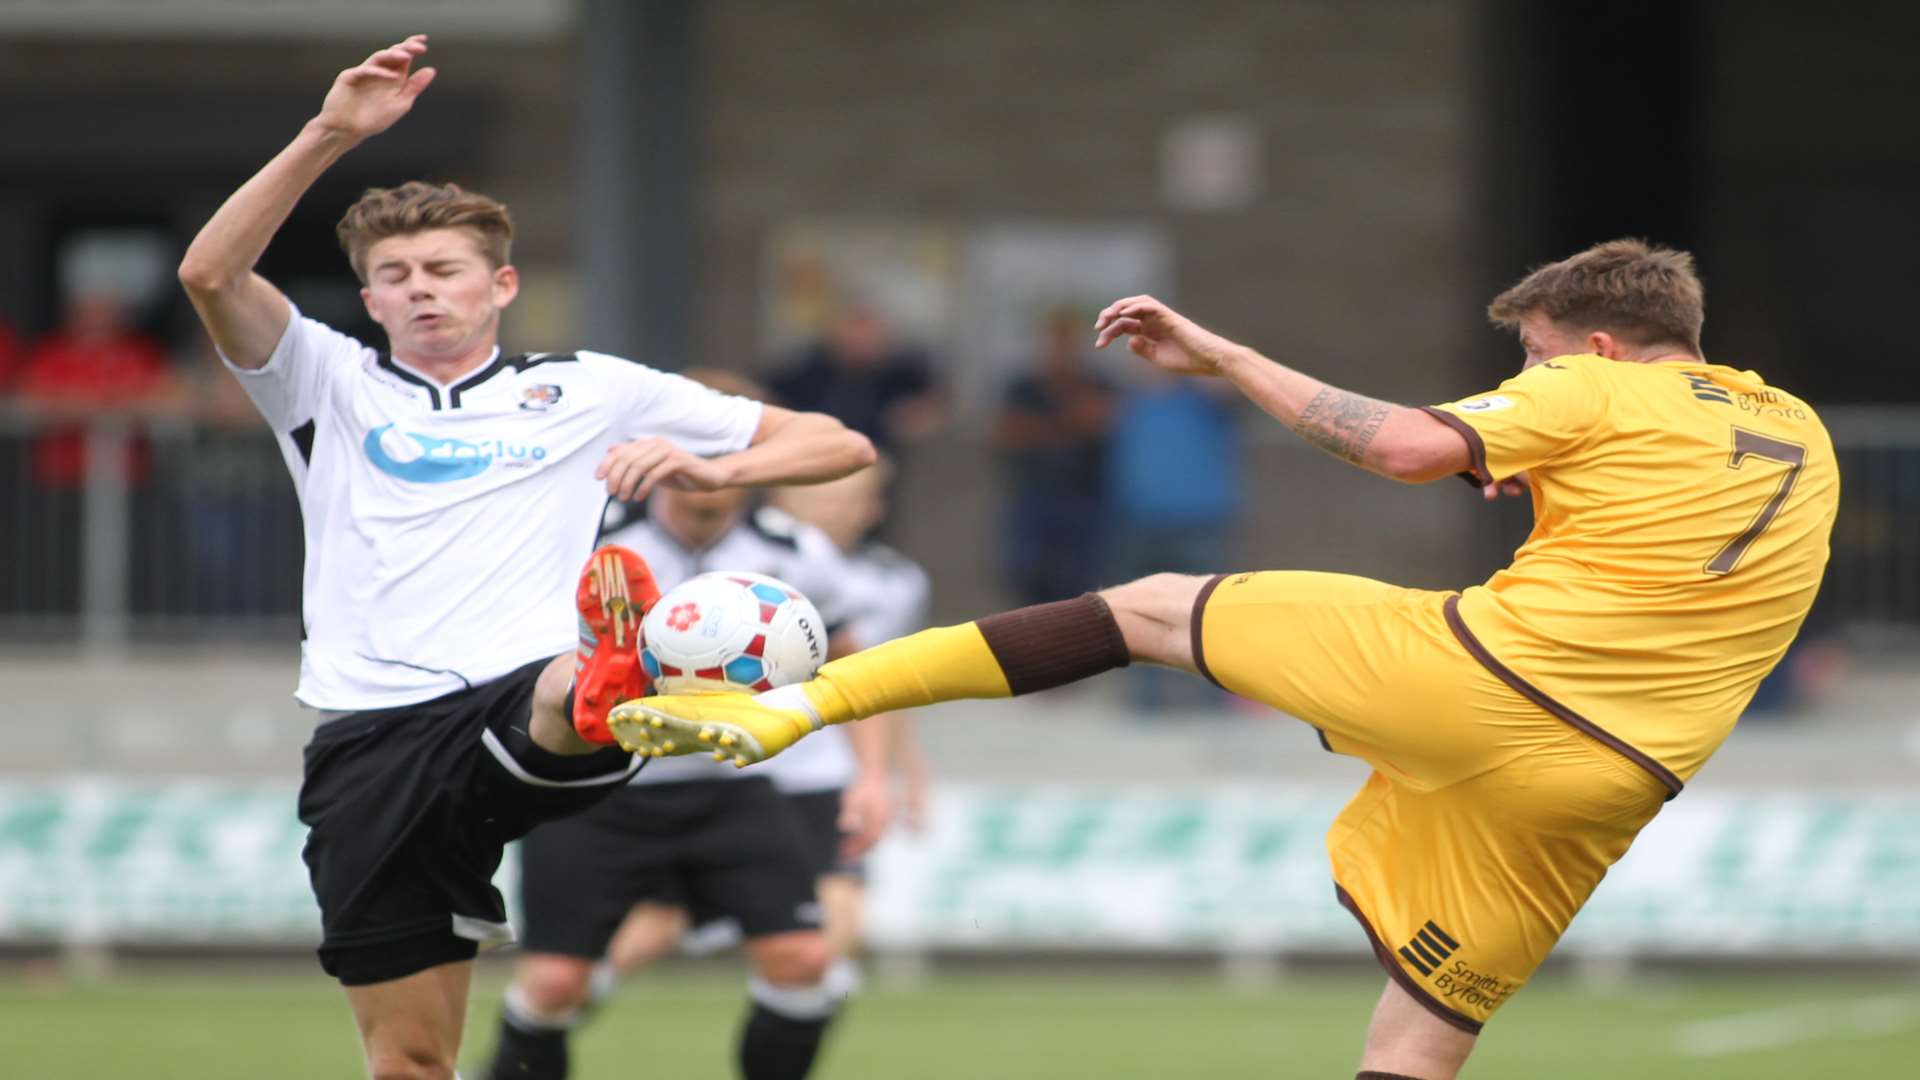 George Sykes gets his foot in for Dartford against Sutton Picture: John Westhrop